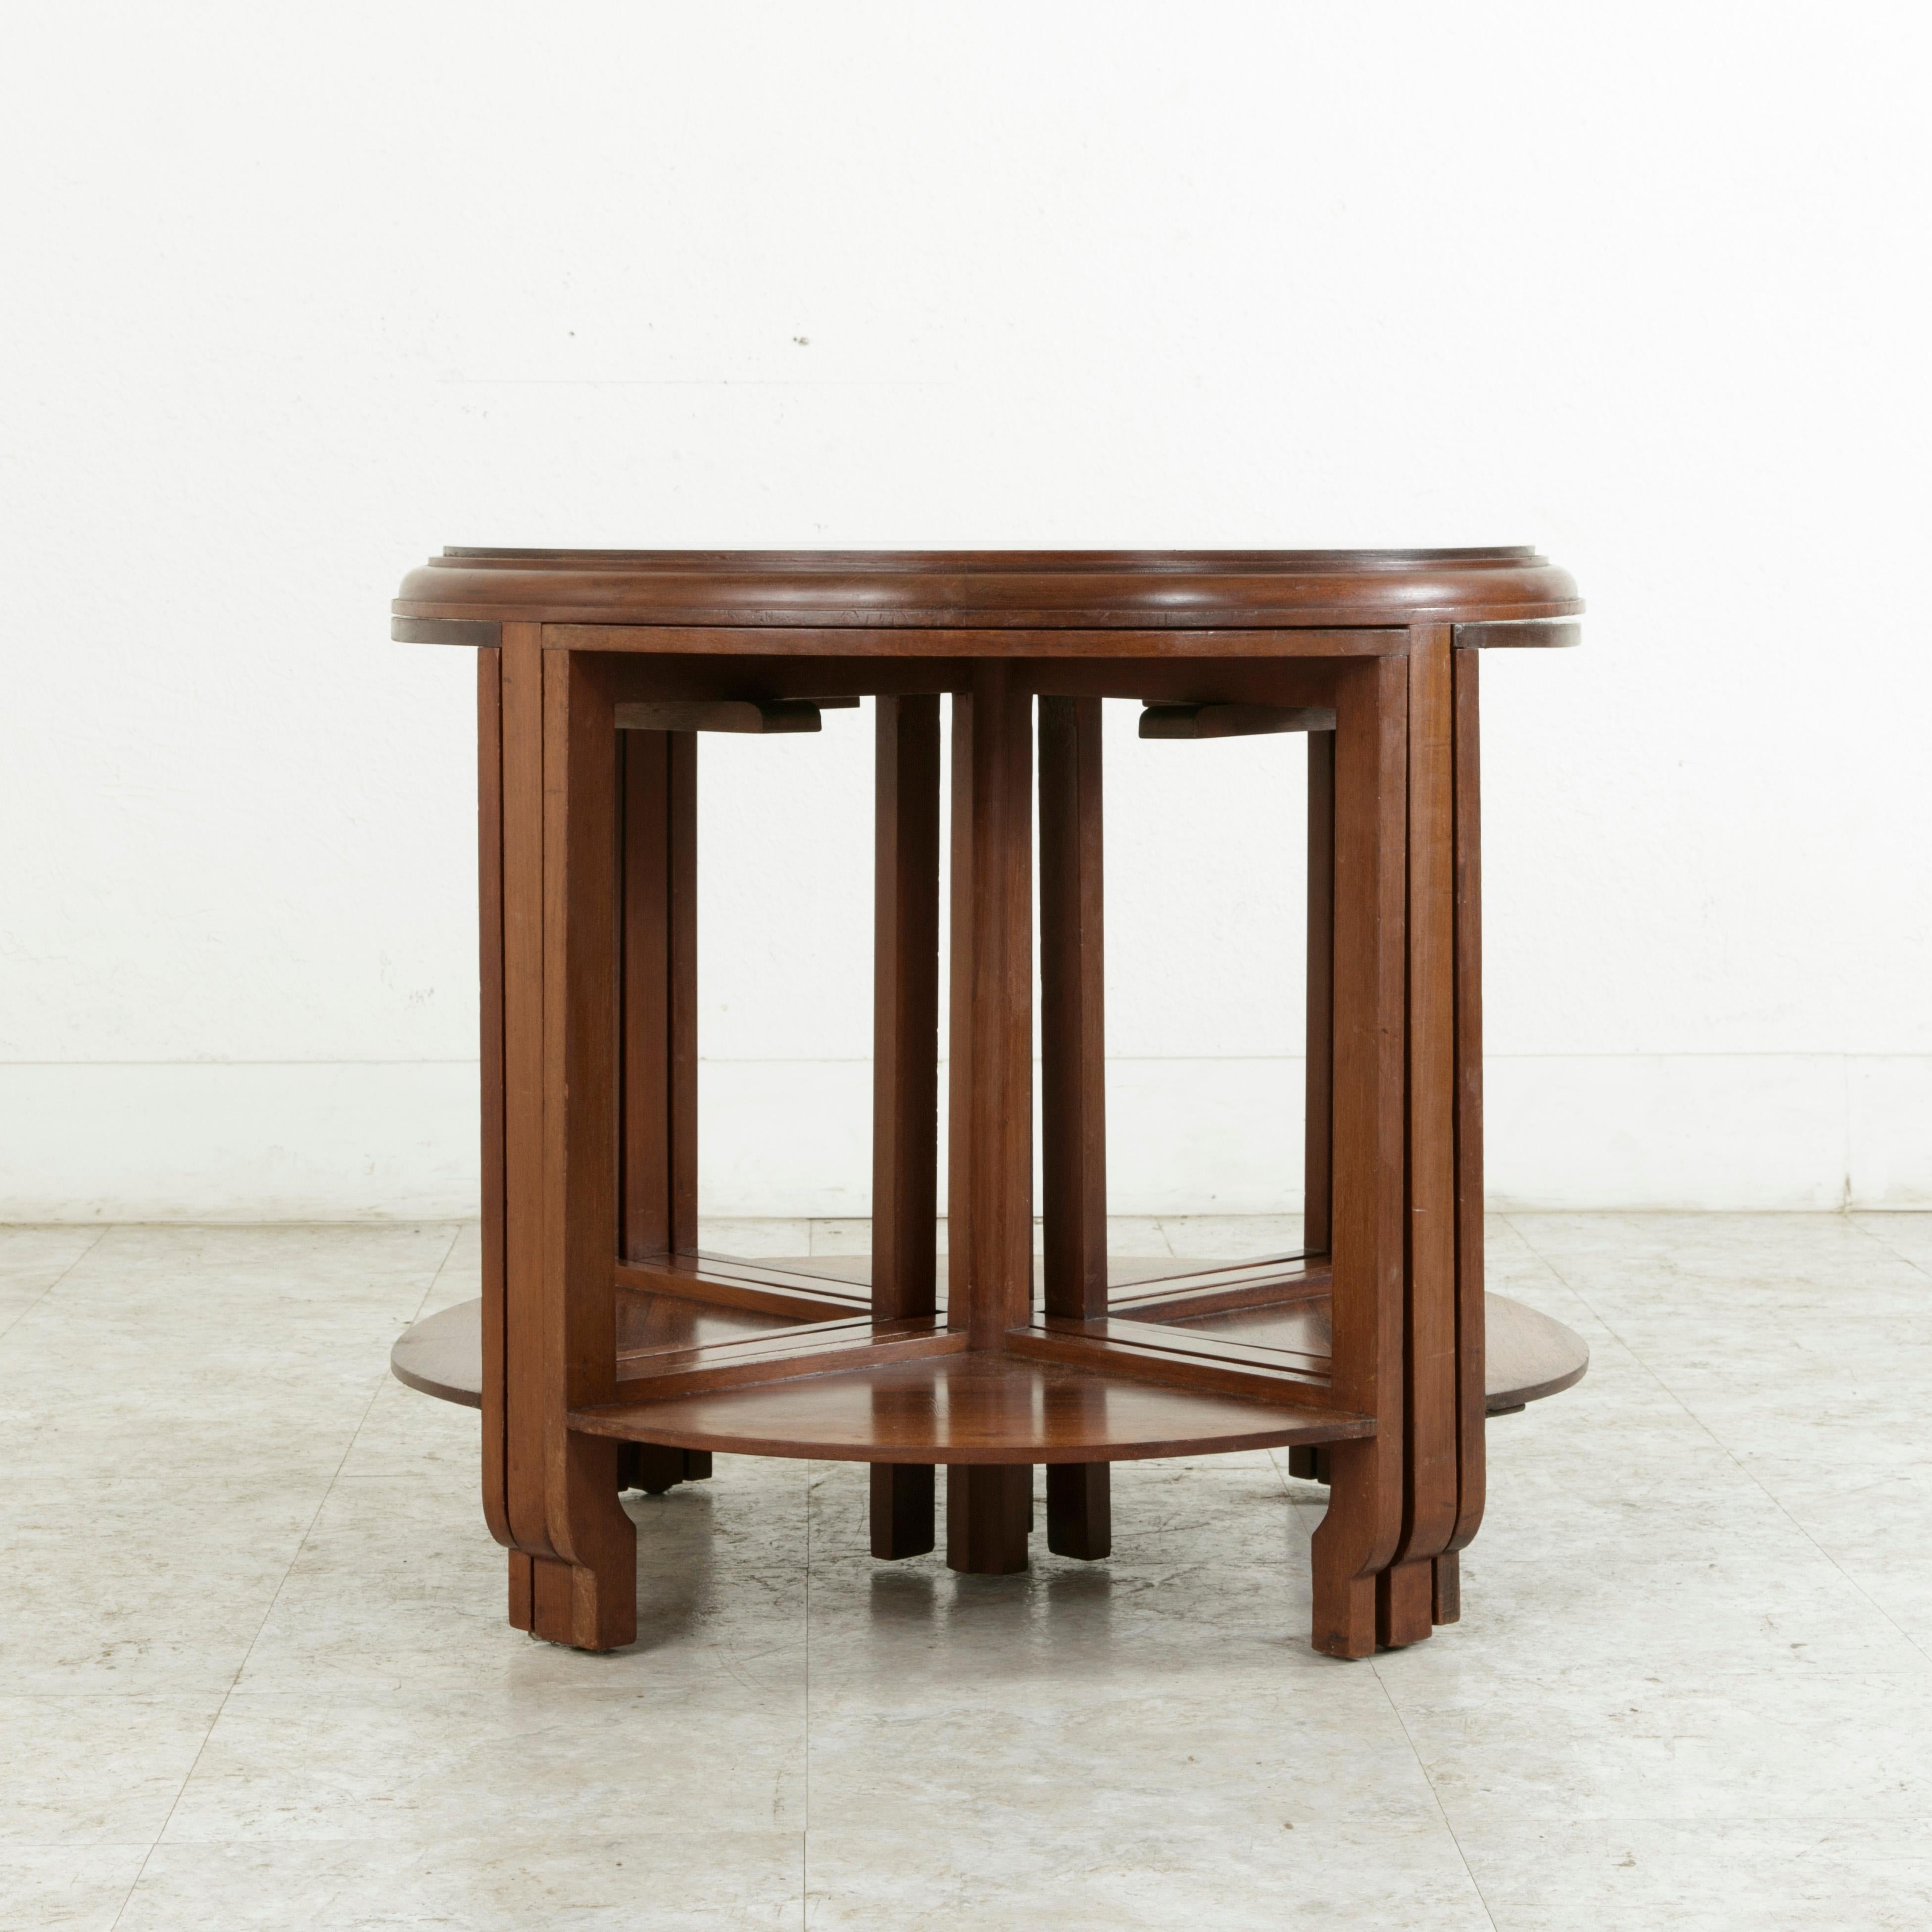 Early 20th Century French Art Deco Louis Majorelle Coffee Table, Nesting Tables For Sale 1